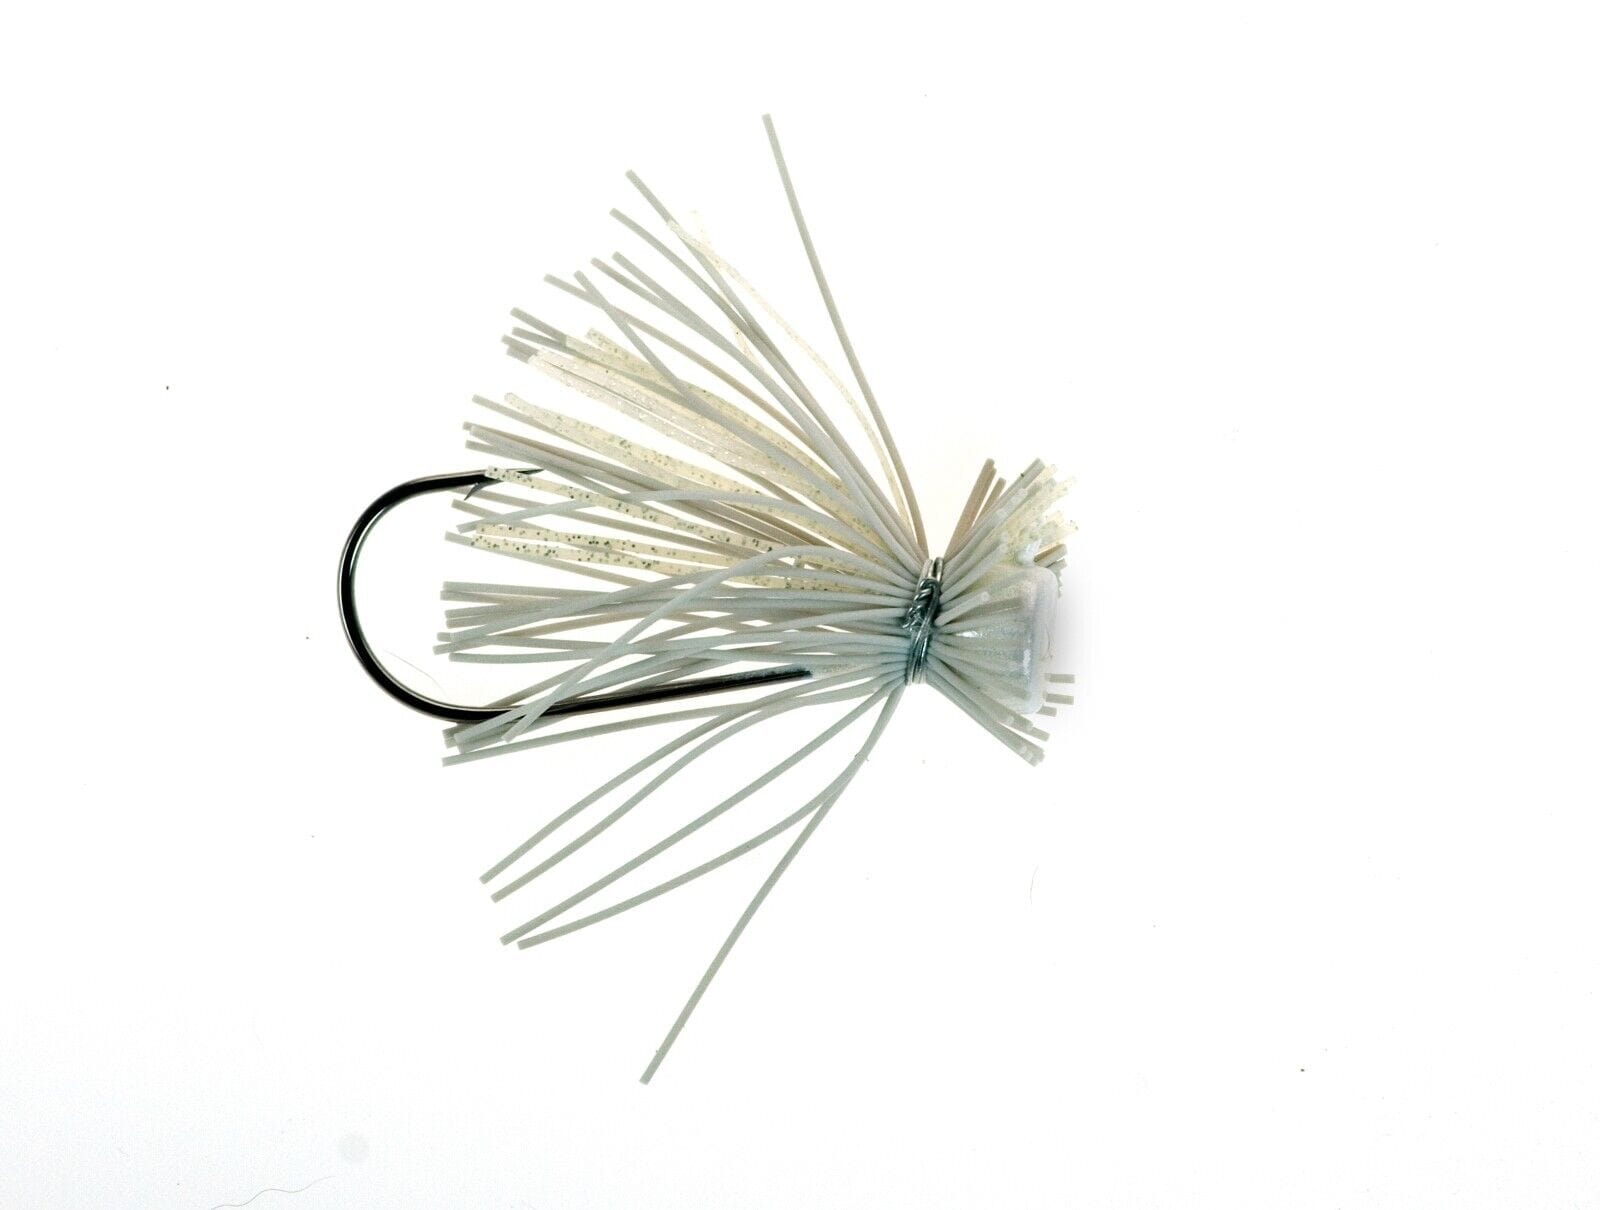 Lures Buckeye Lures Spot Remover Finesse Jigs Green Pumpkin / 3/8 oz. Buckeye Lures Spot Remover Finesse Jigs | Pescador Fishing Supply